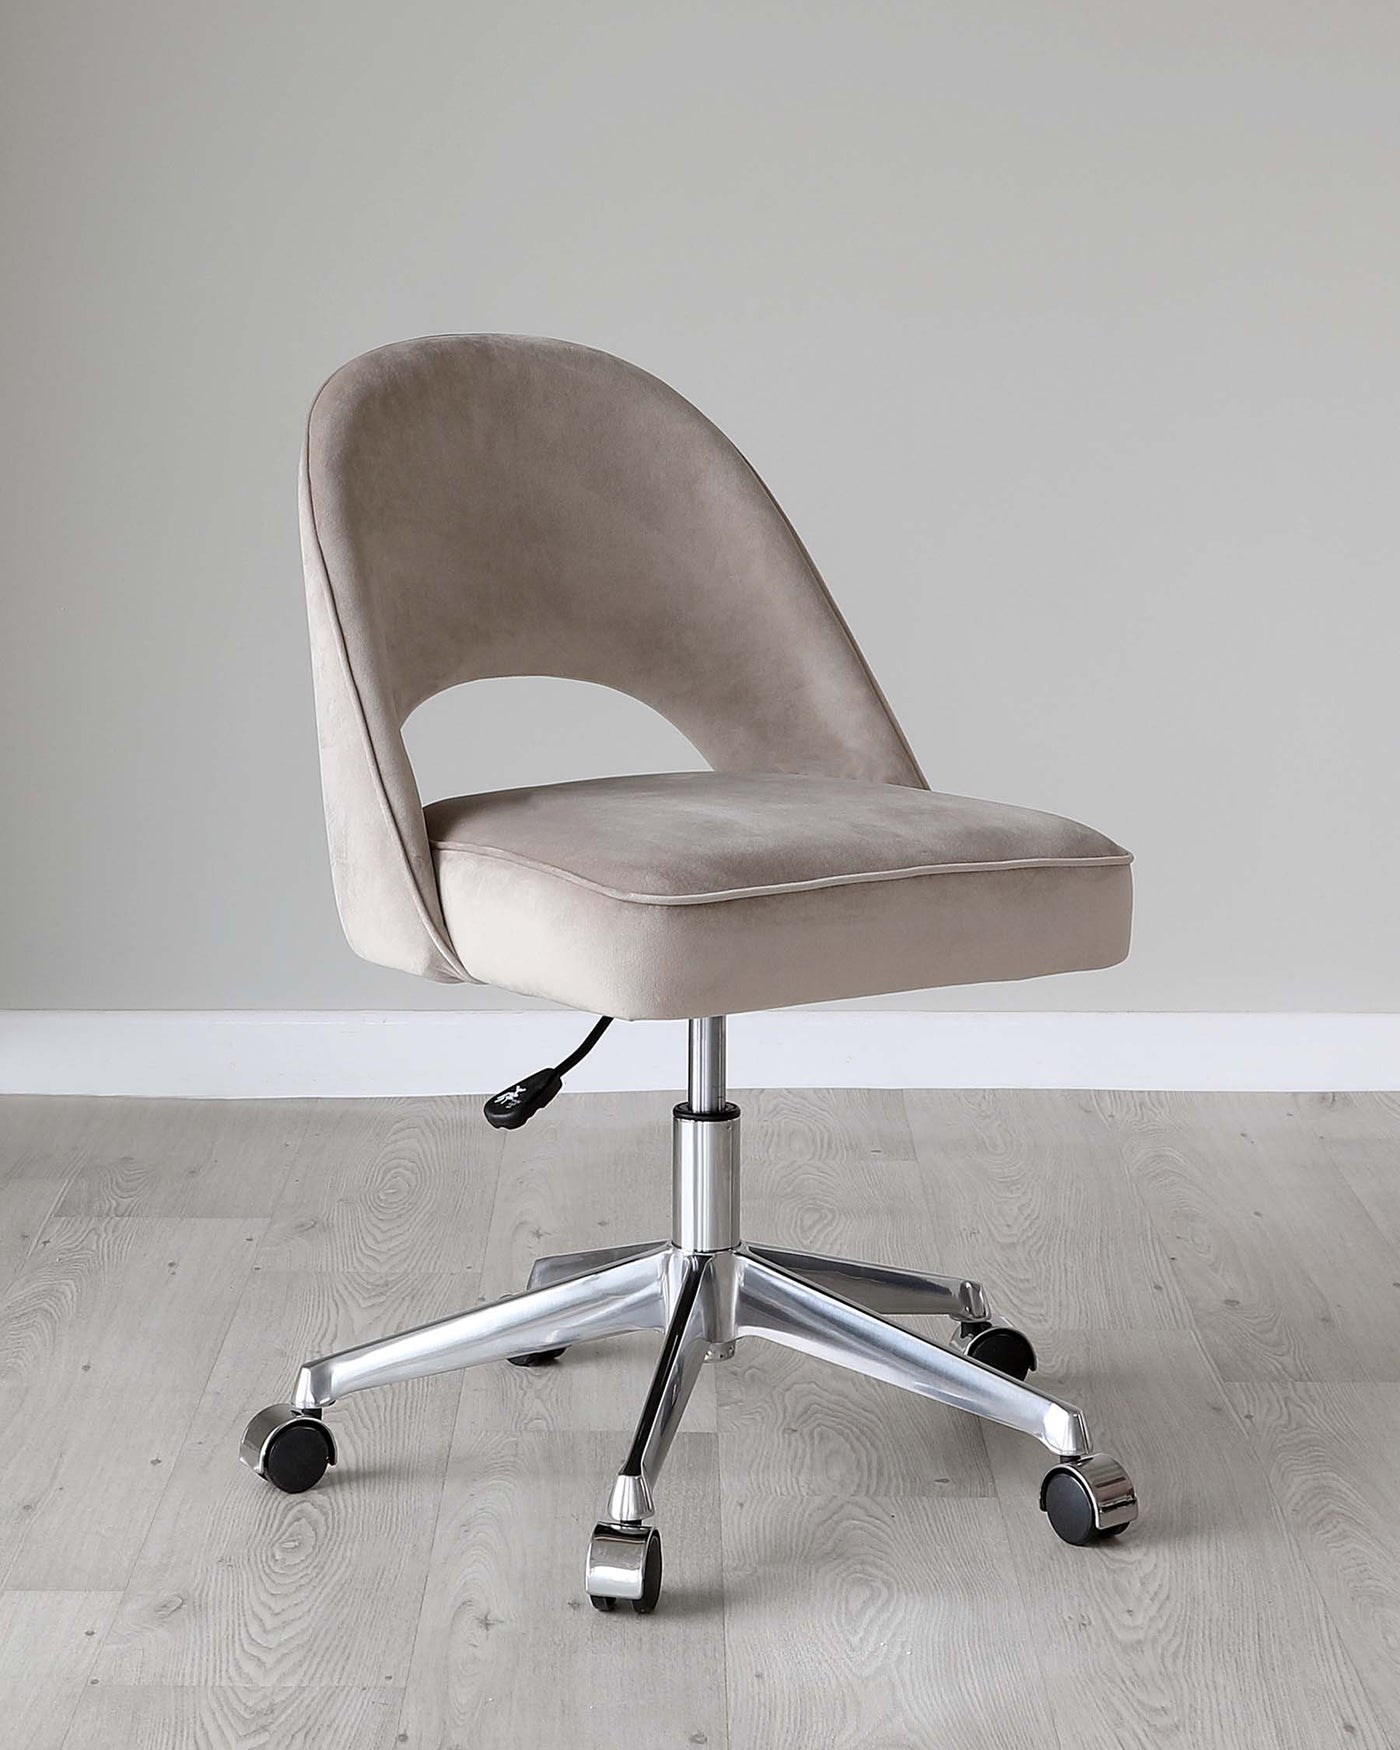 Modern swivel office chair with a plush velvet-like taupe upholstery, curved backrest, and a sleek chrome base with five caster wheels.